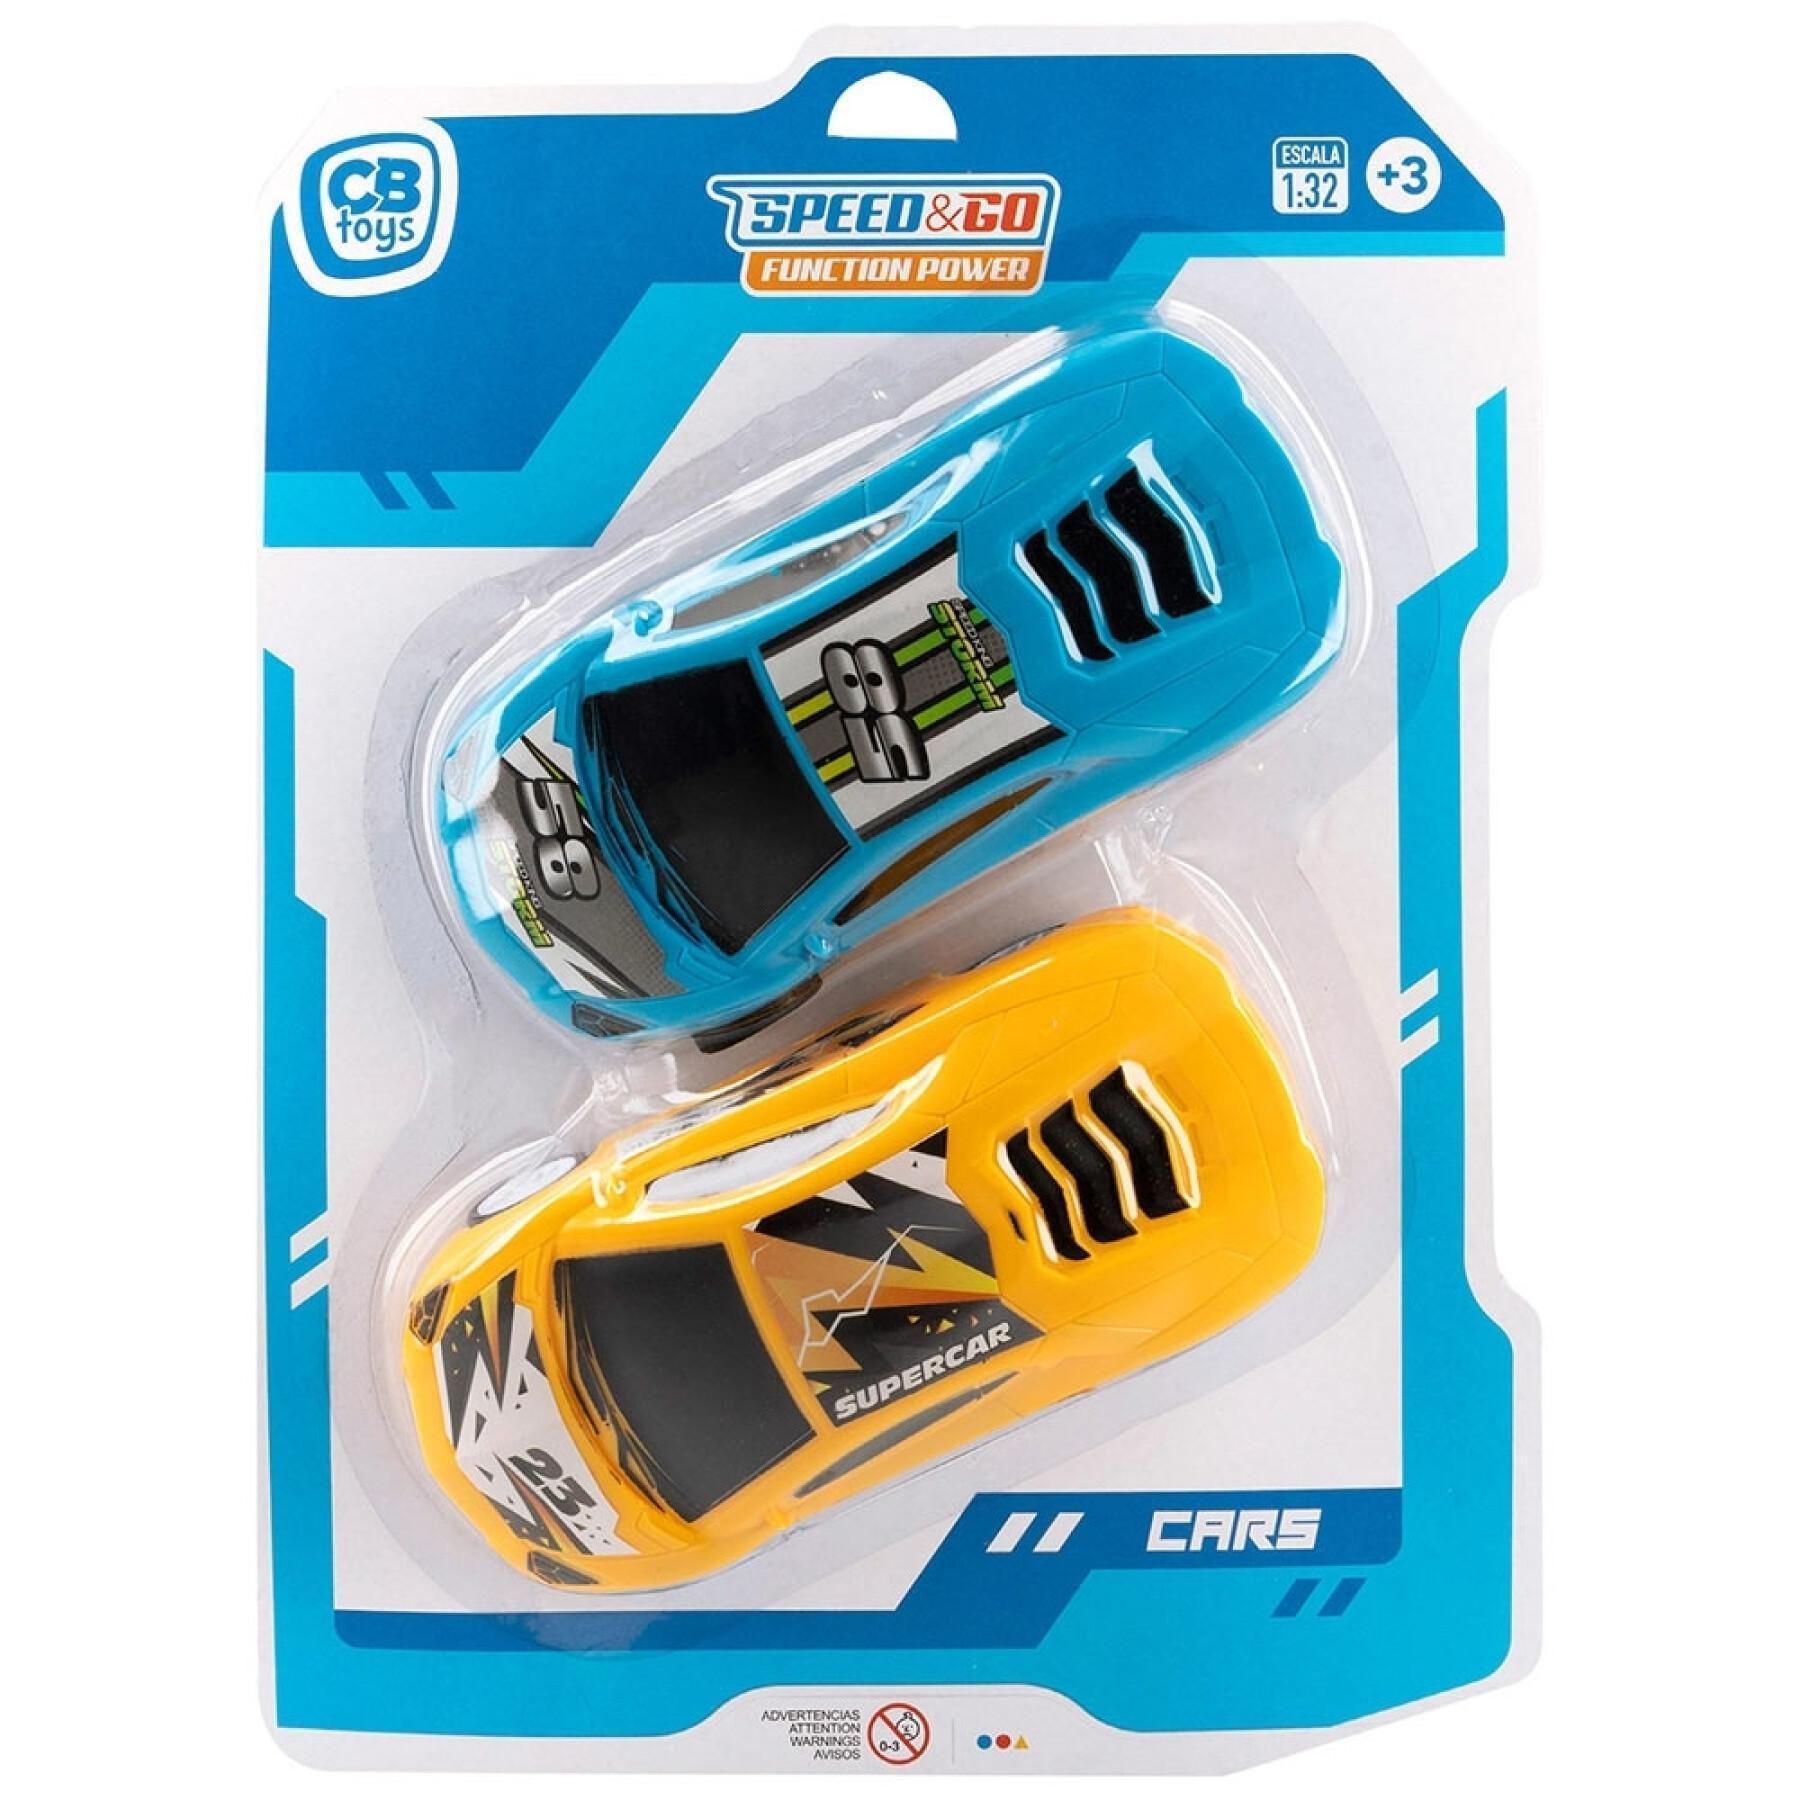 Coche Speed & Go Blister 2 Coches